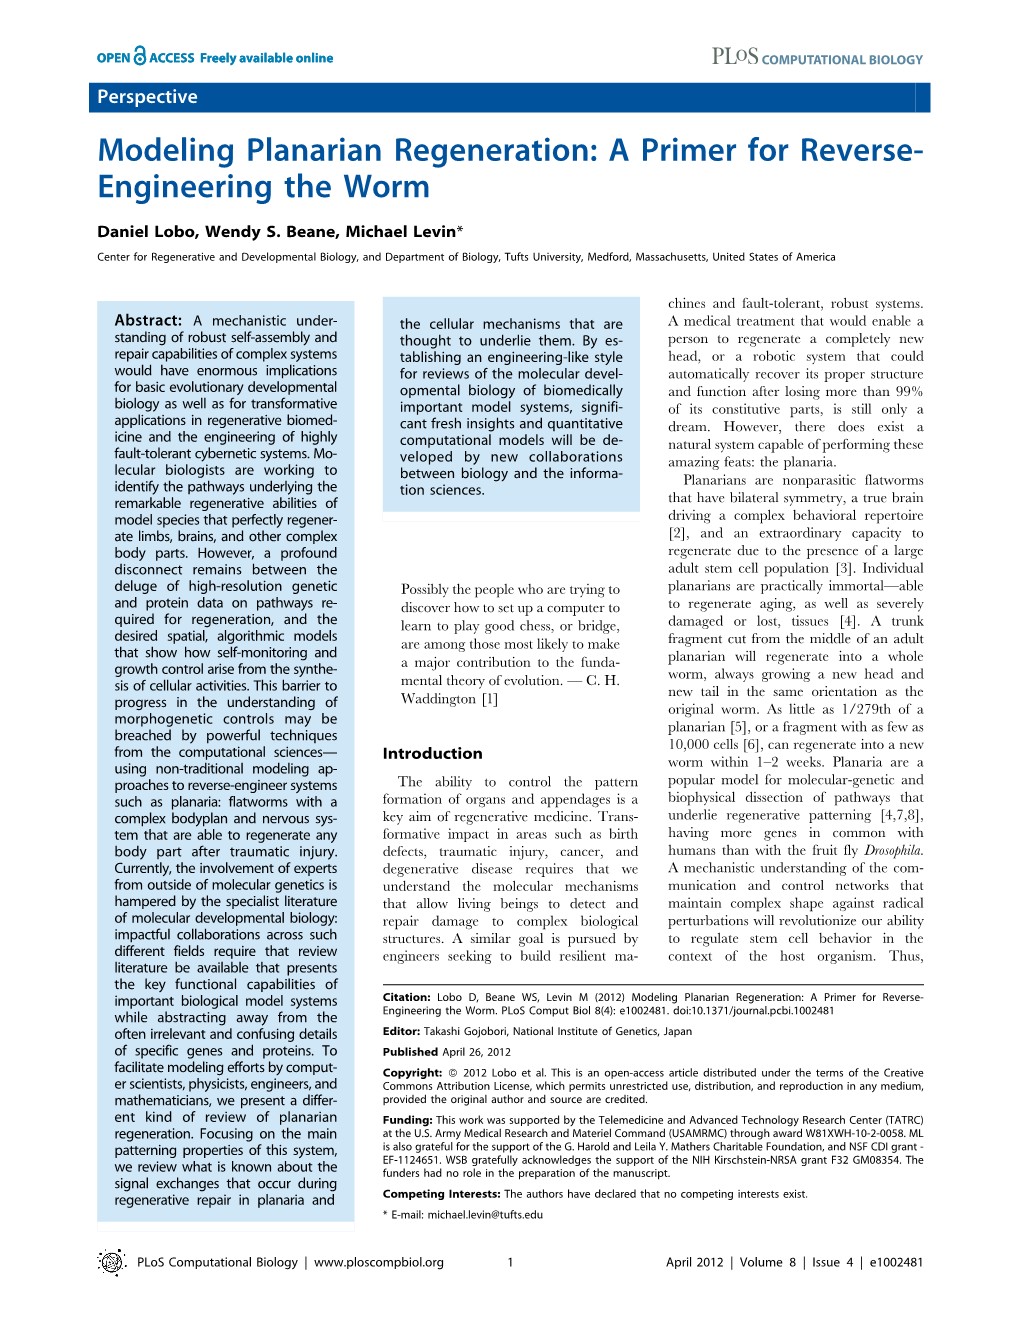 Modeling Planarian Regeneration: a Primer for Reverse- Engineering the Worm